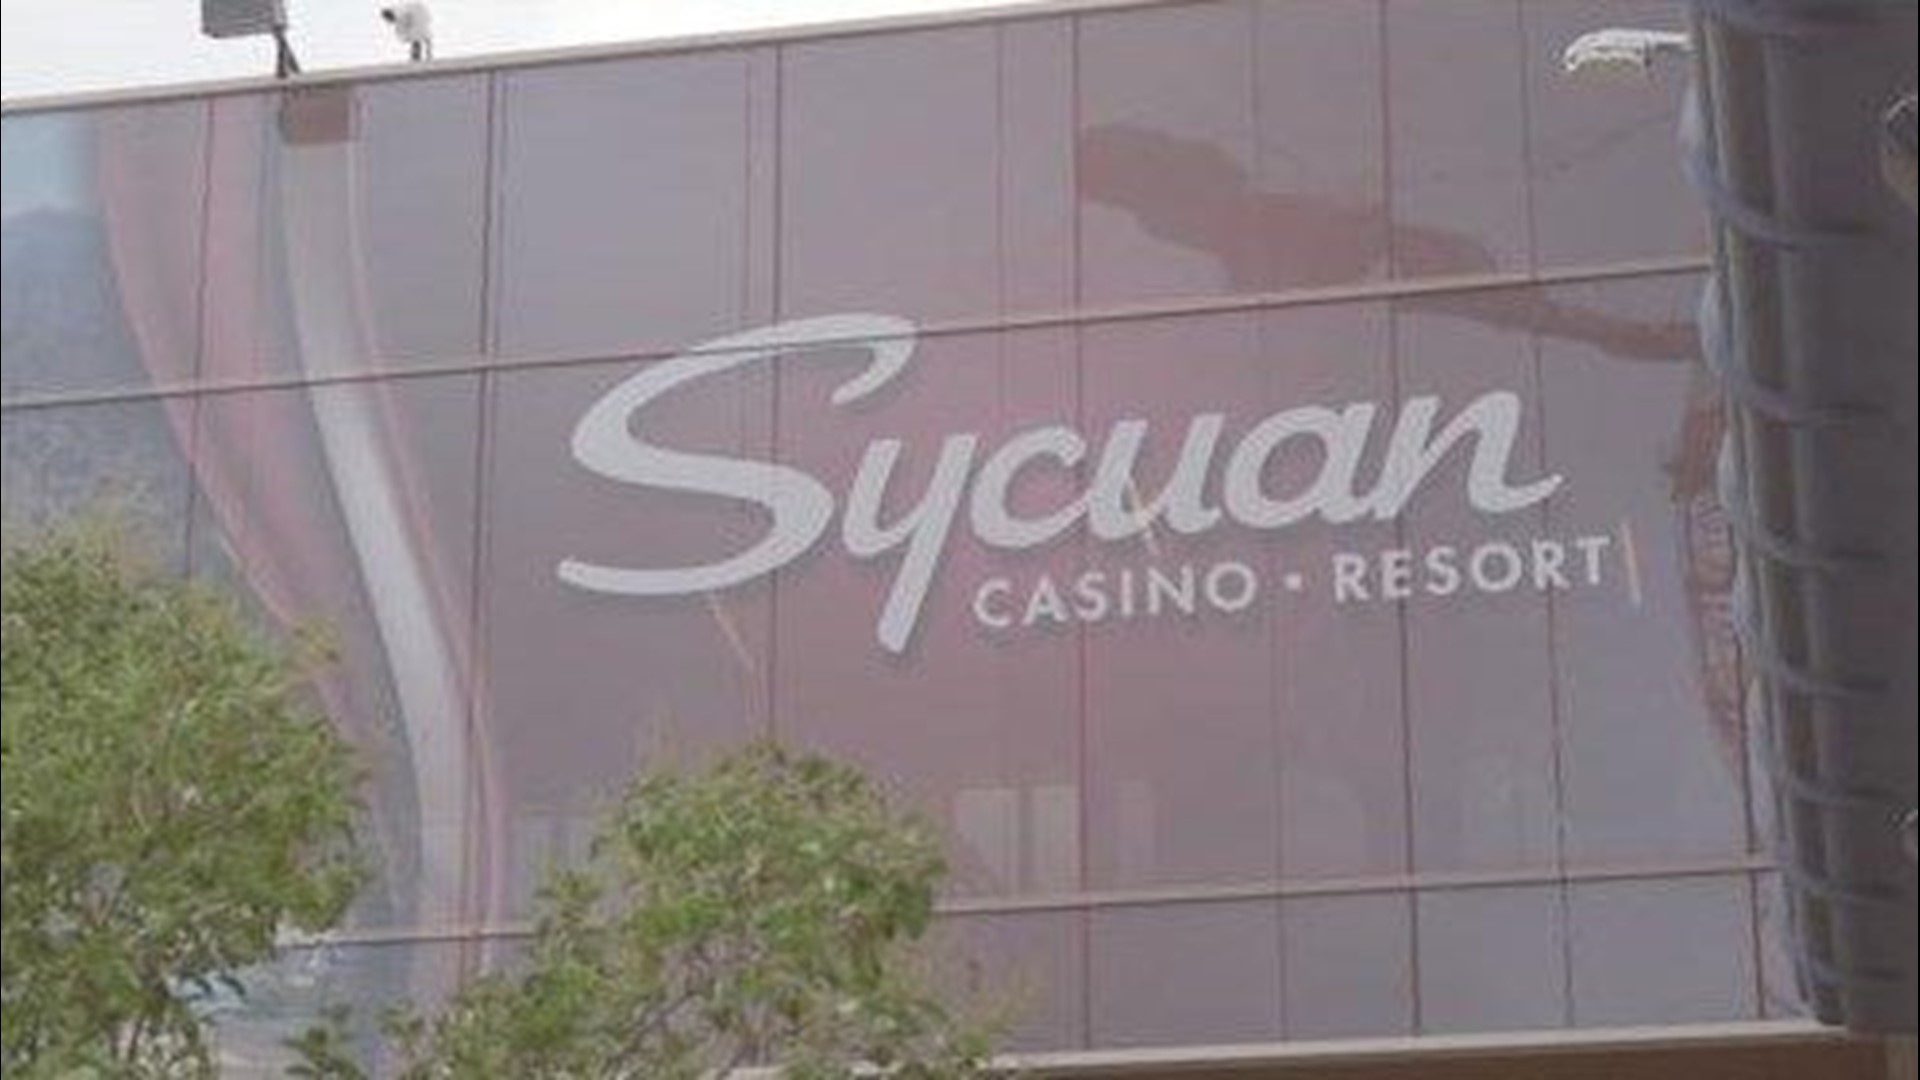 sycuan casino telephone number